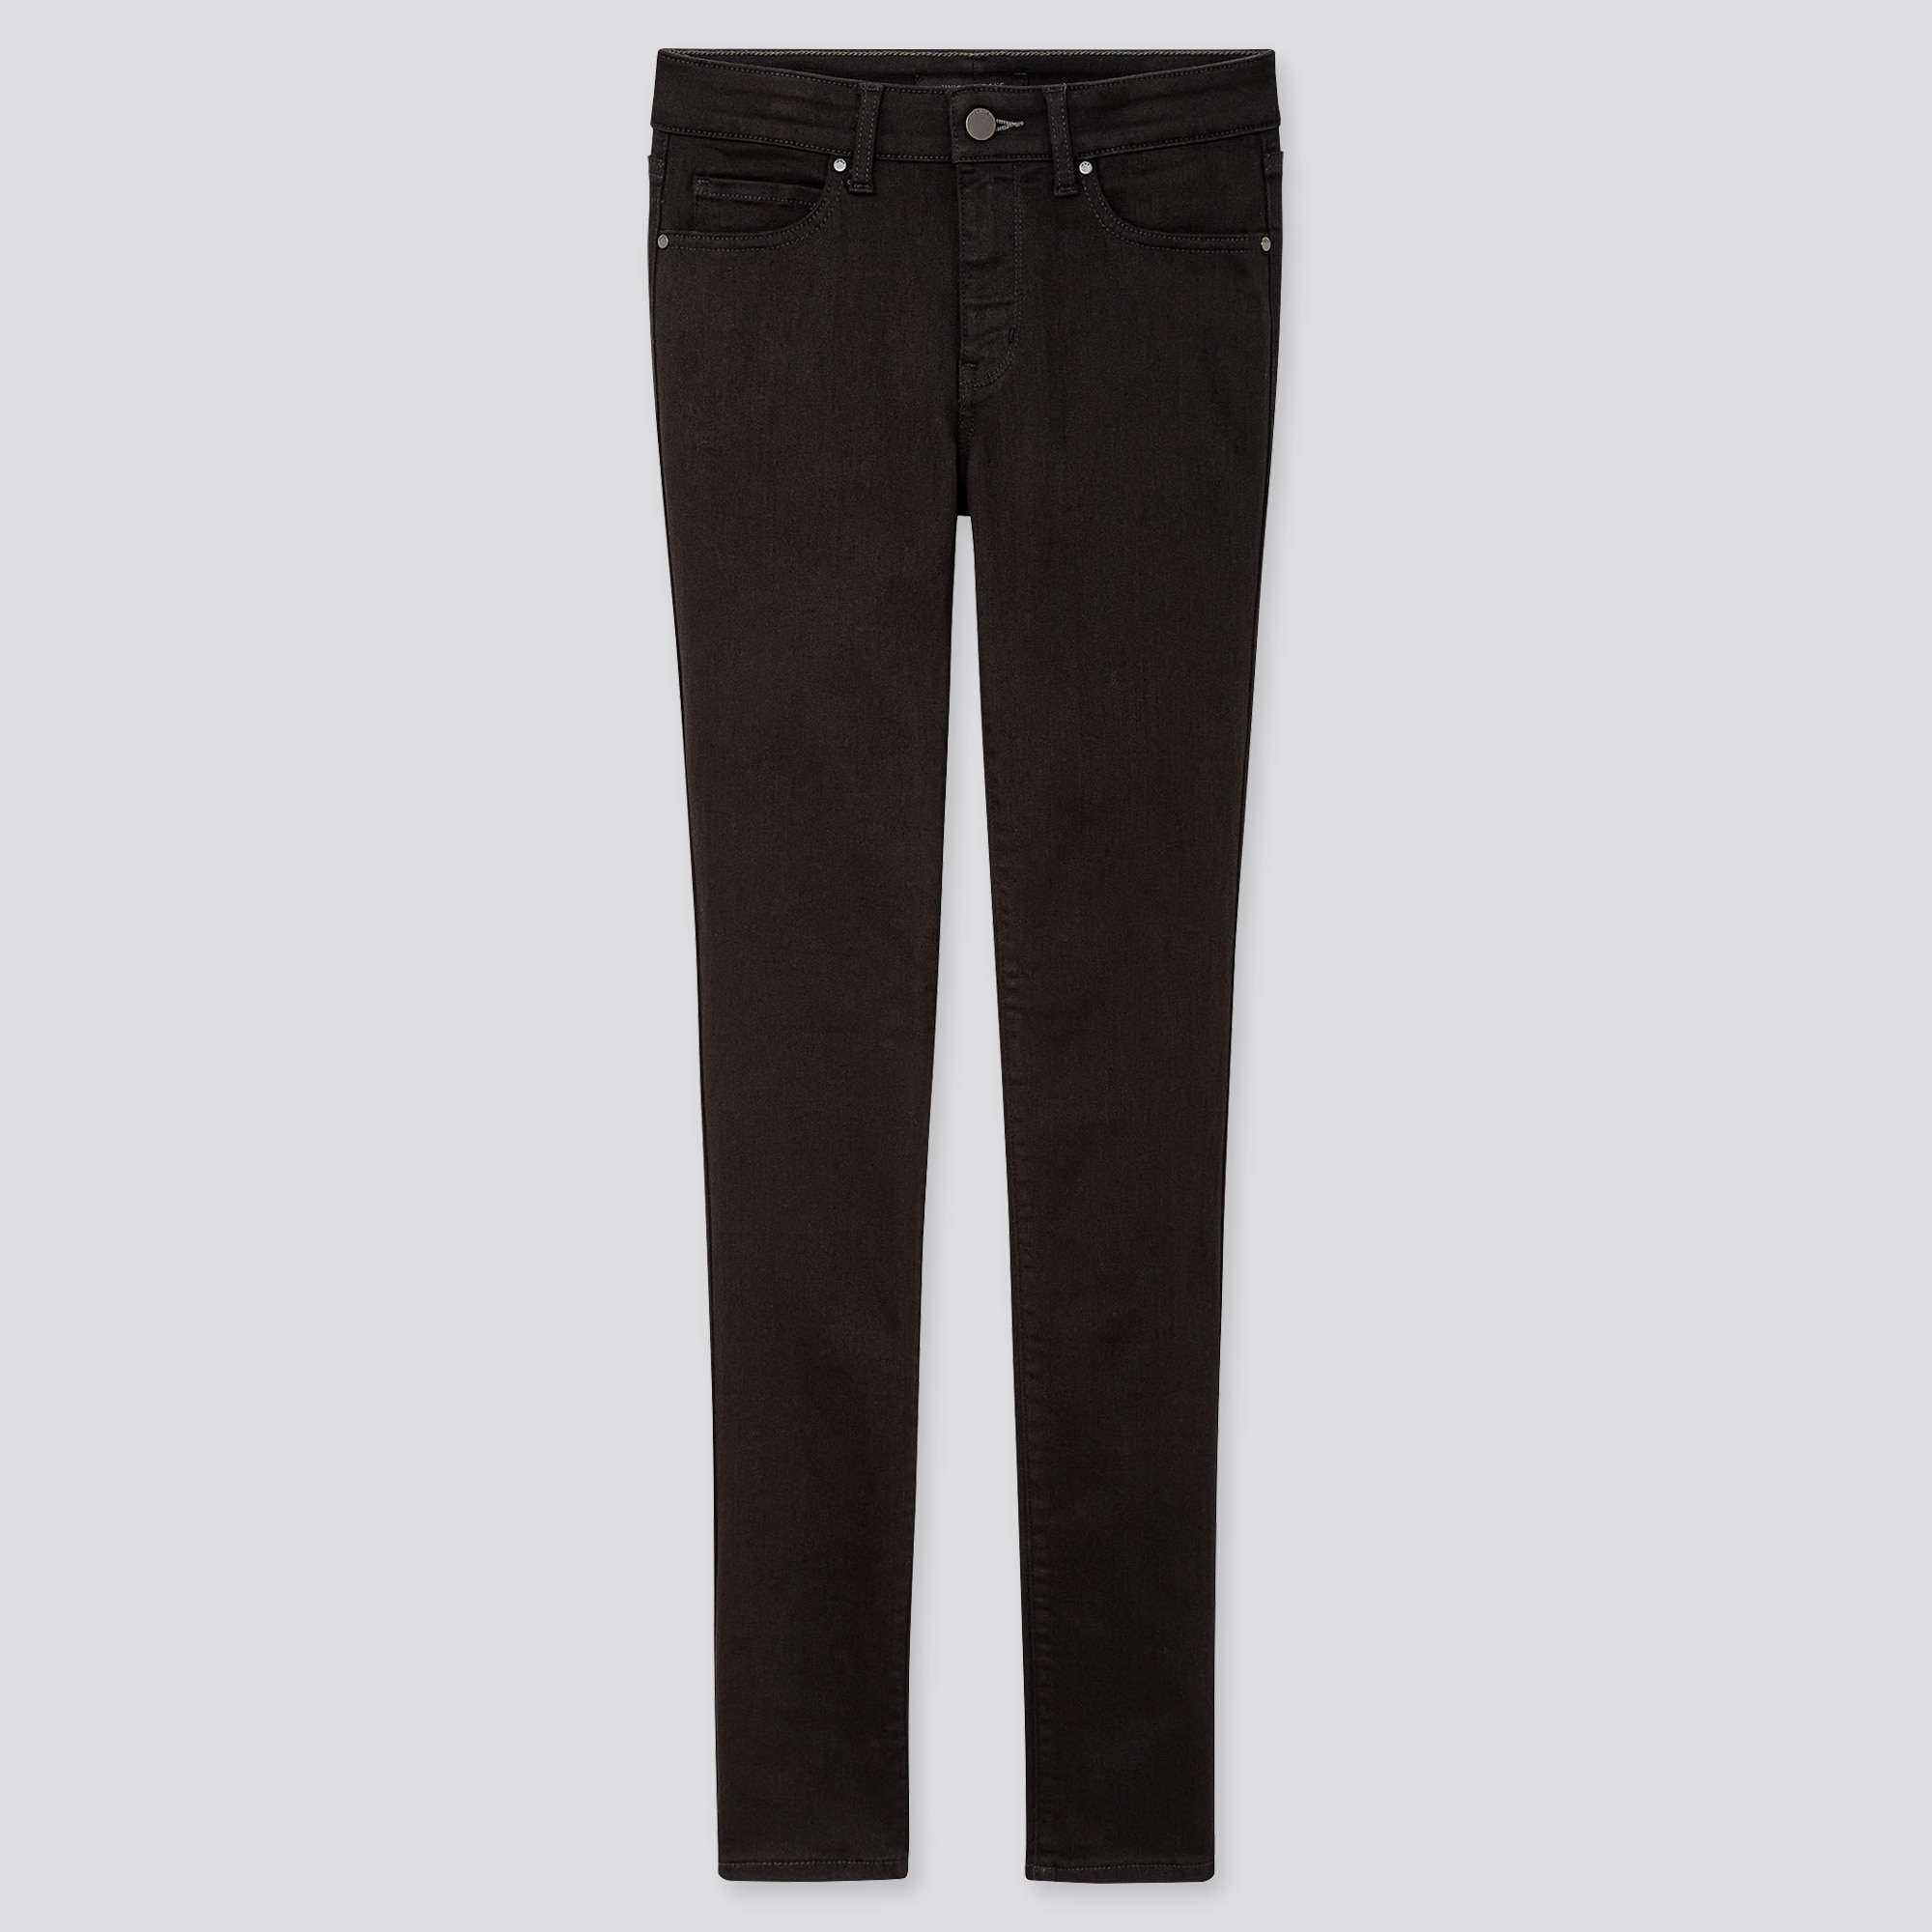 male to female pants size